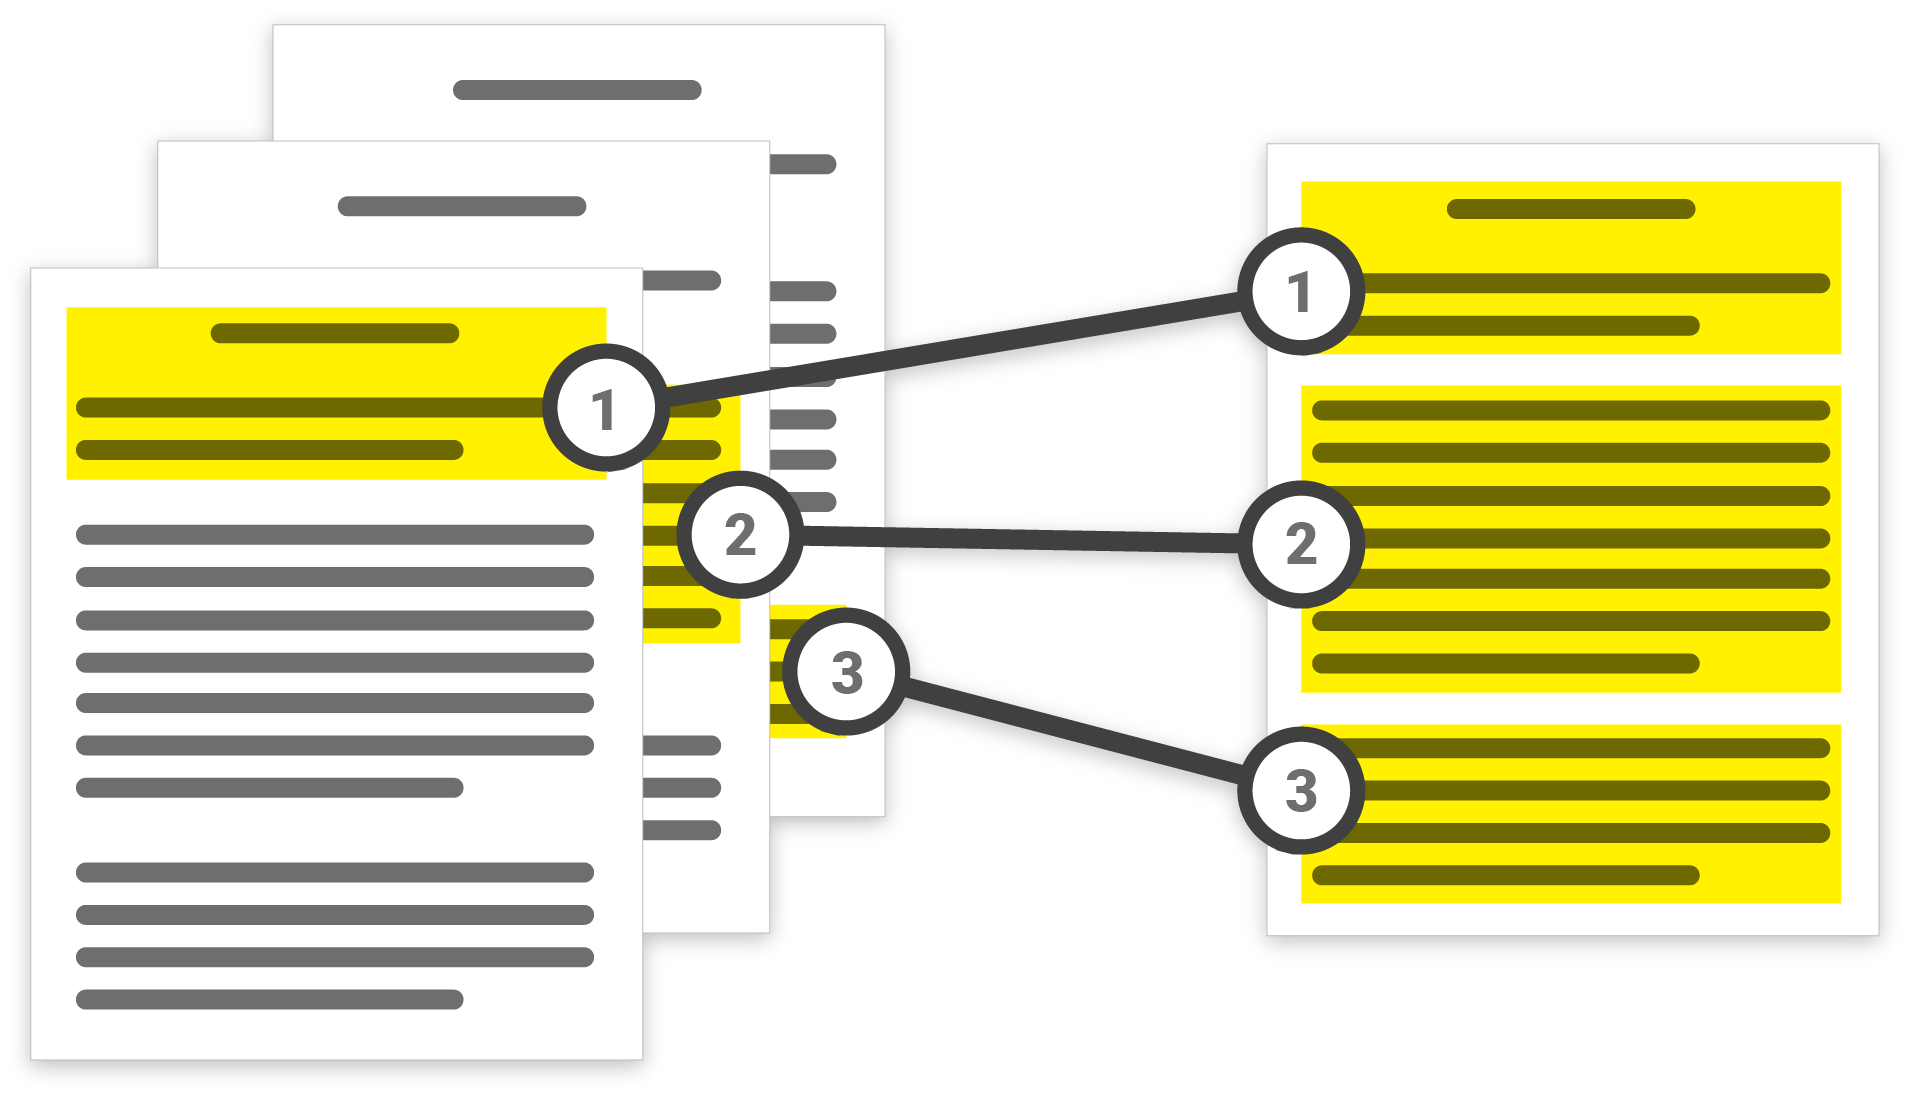 Illustration showing a document corresponding to pieces of another document.